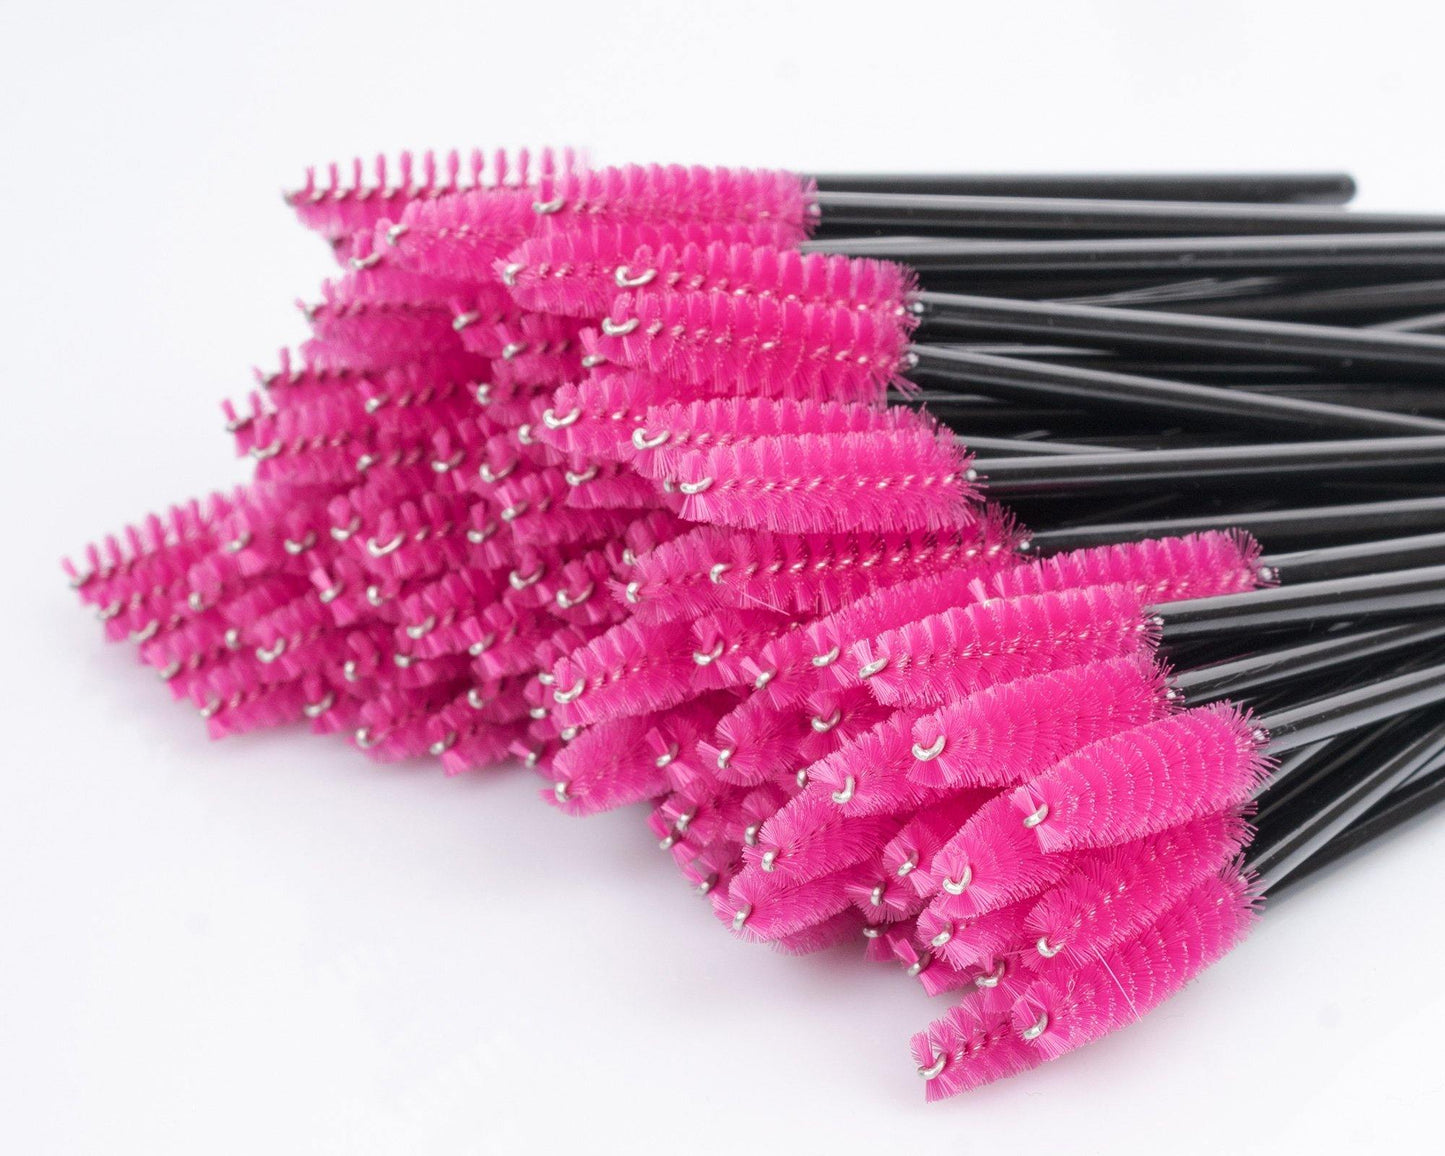 Mascara Wand Pink and Black - Outlash Extensions Pro US